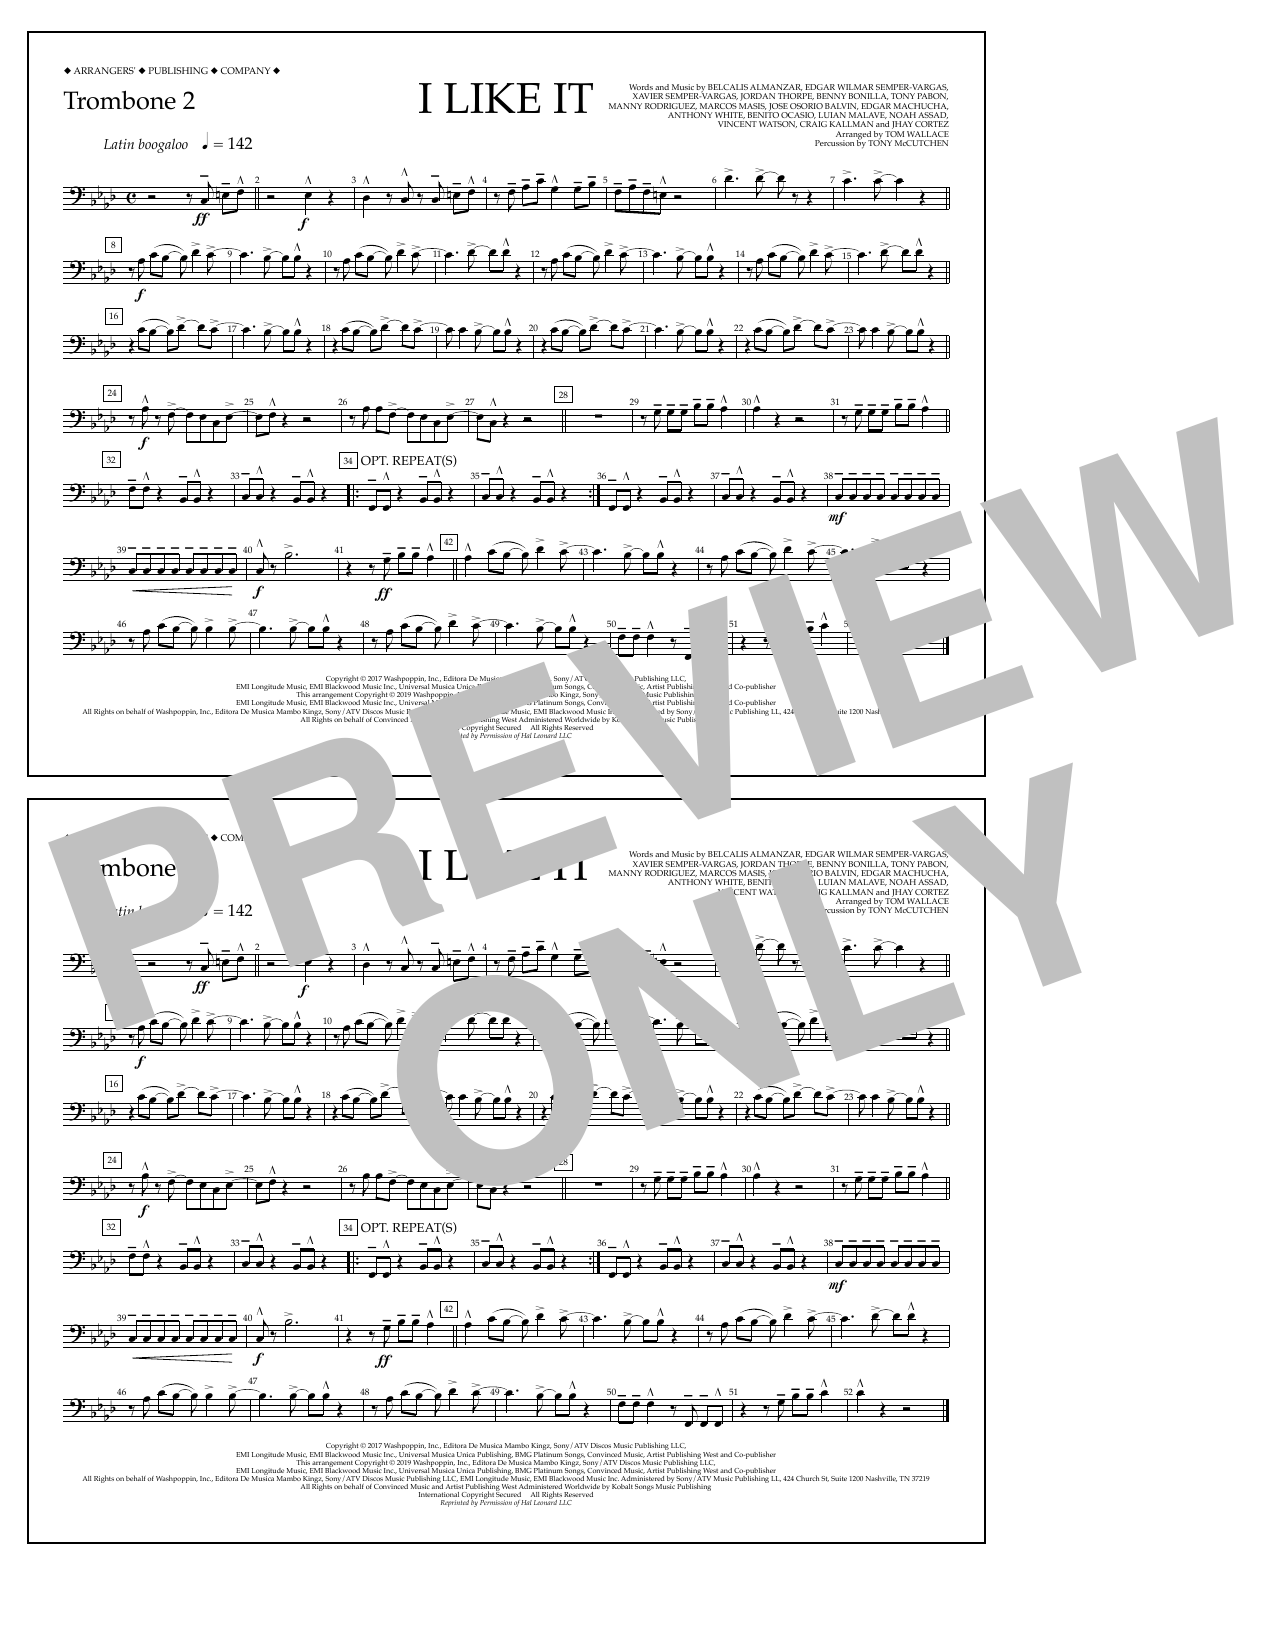 Cardi B, Bad Bunny & J Balvin I Like It (arr. Tom Wallace) - Trombone 2 sheet music preview music notes and score for Marching Band including 1 page(s)